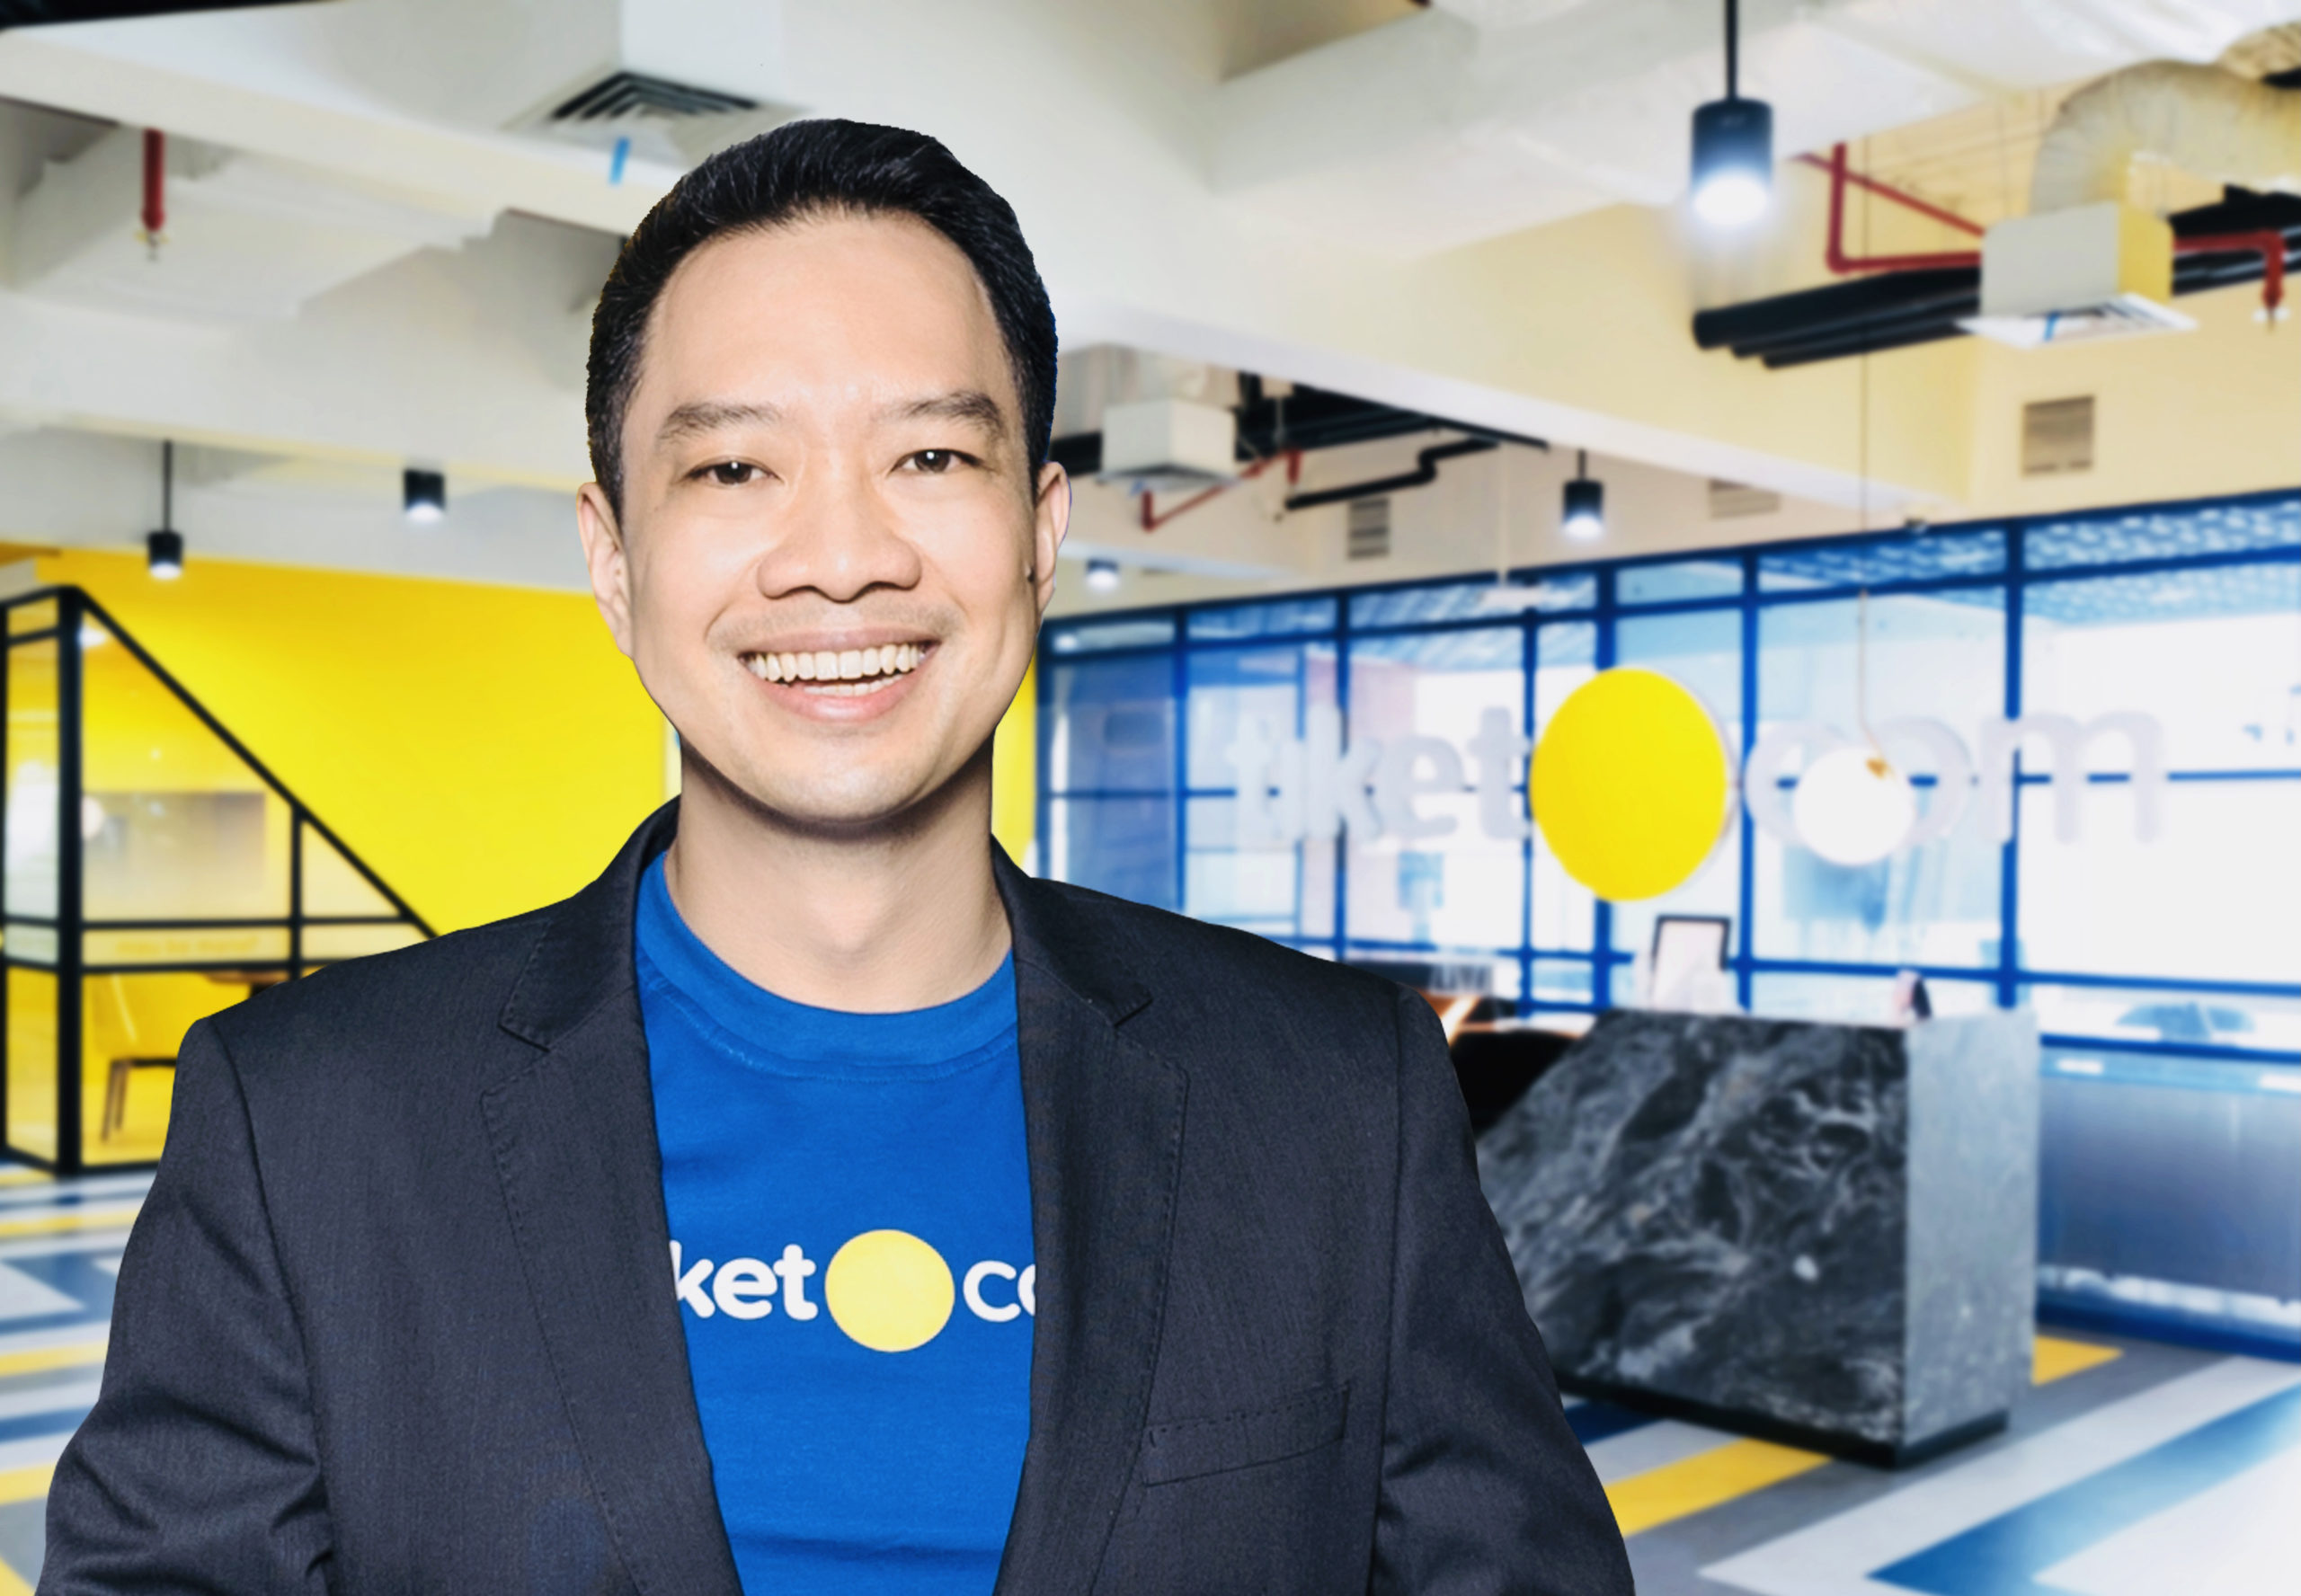 Indonesia-based travel operator Tiket.com will go public next year, CEO confirms